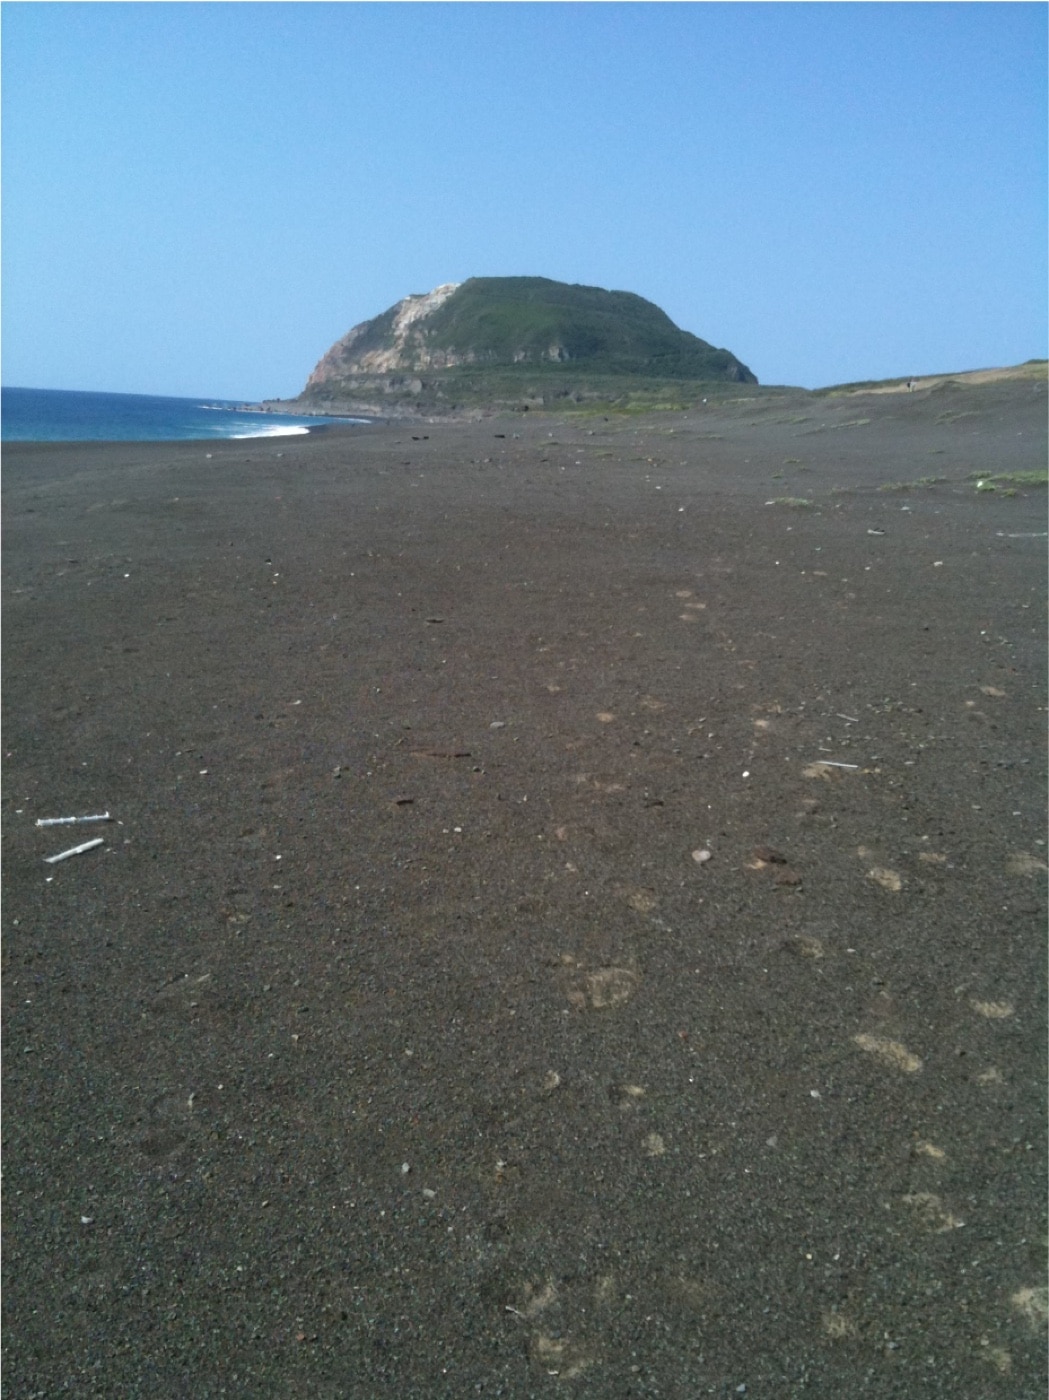 In this photo, we can see the black sand of the Iwo Jima beaches today. Iwo Jima and Okinawa were two bloody battles necessary in the Pacific War. Lessons learned on the island of Iwo Jima were later applied to the preparations for the invasion and Battle of Okinawa. 